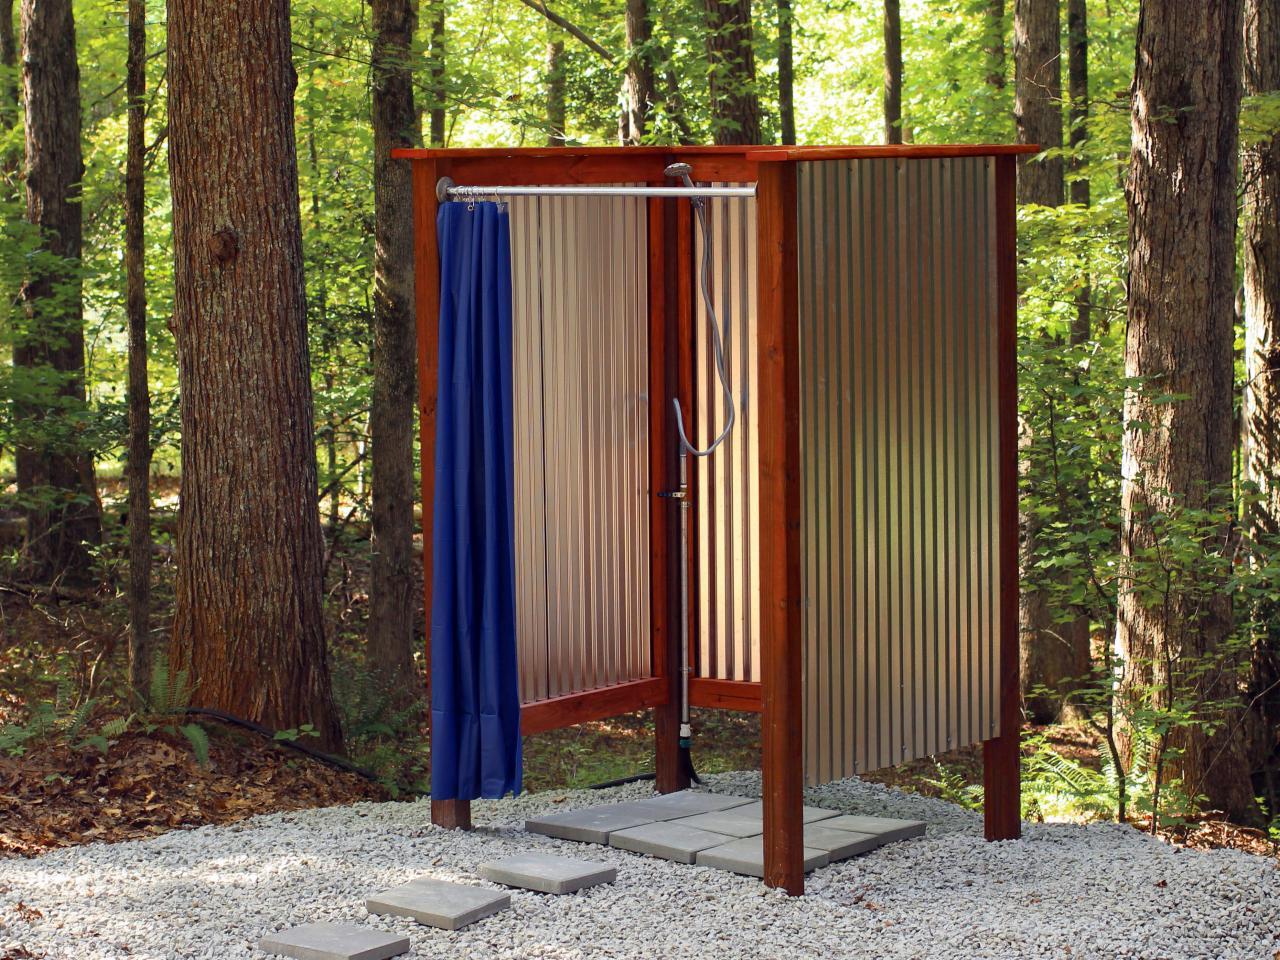 DIY Camp Shower: How to Build Your Own Outdoor Shower